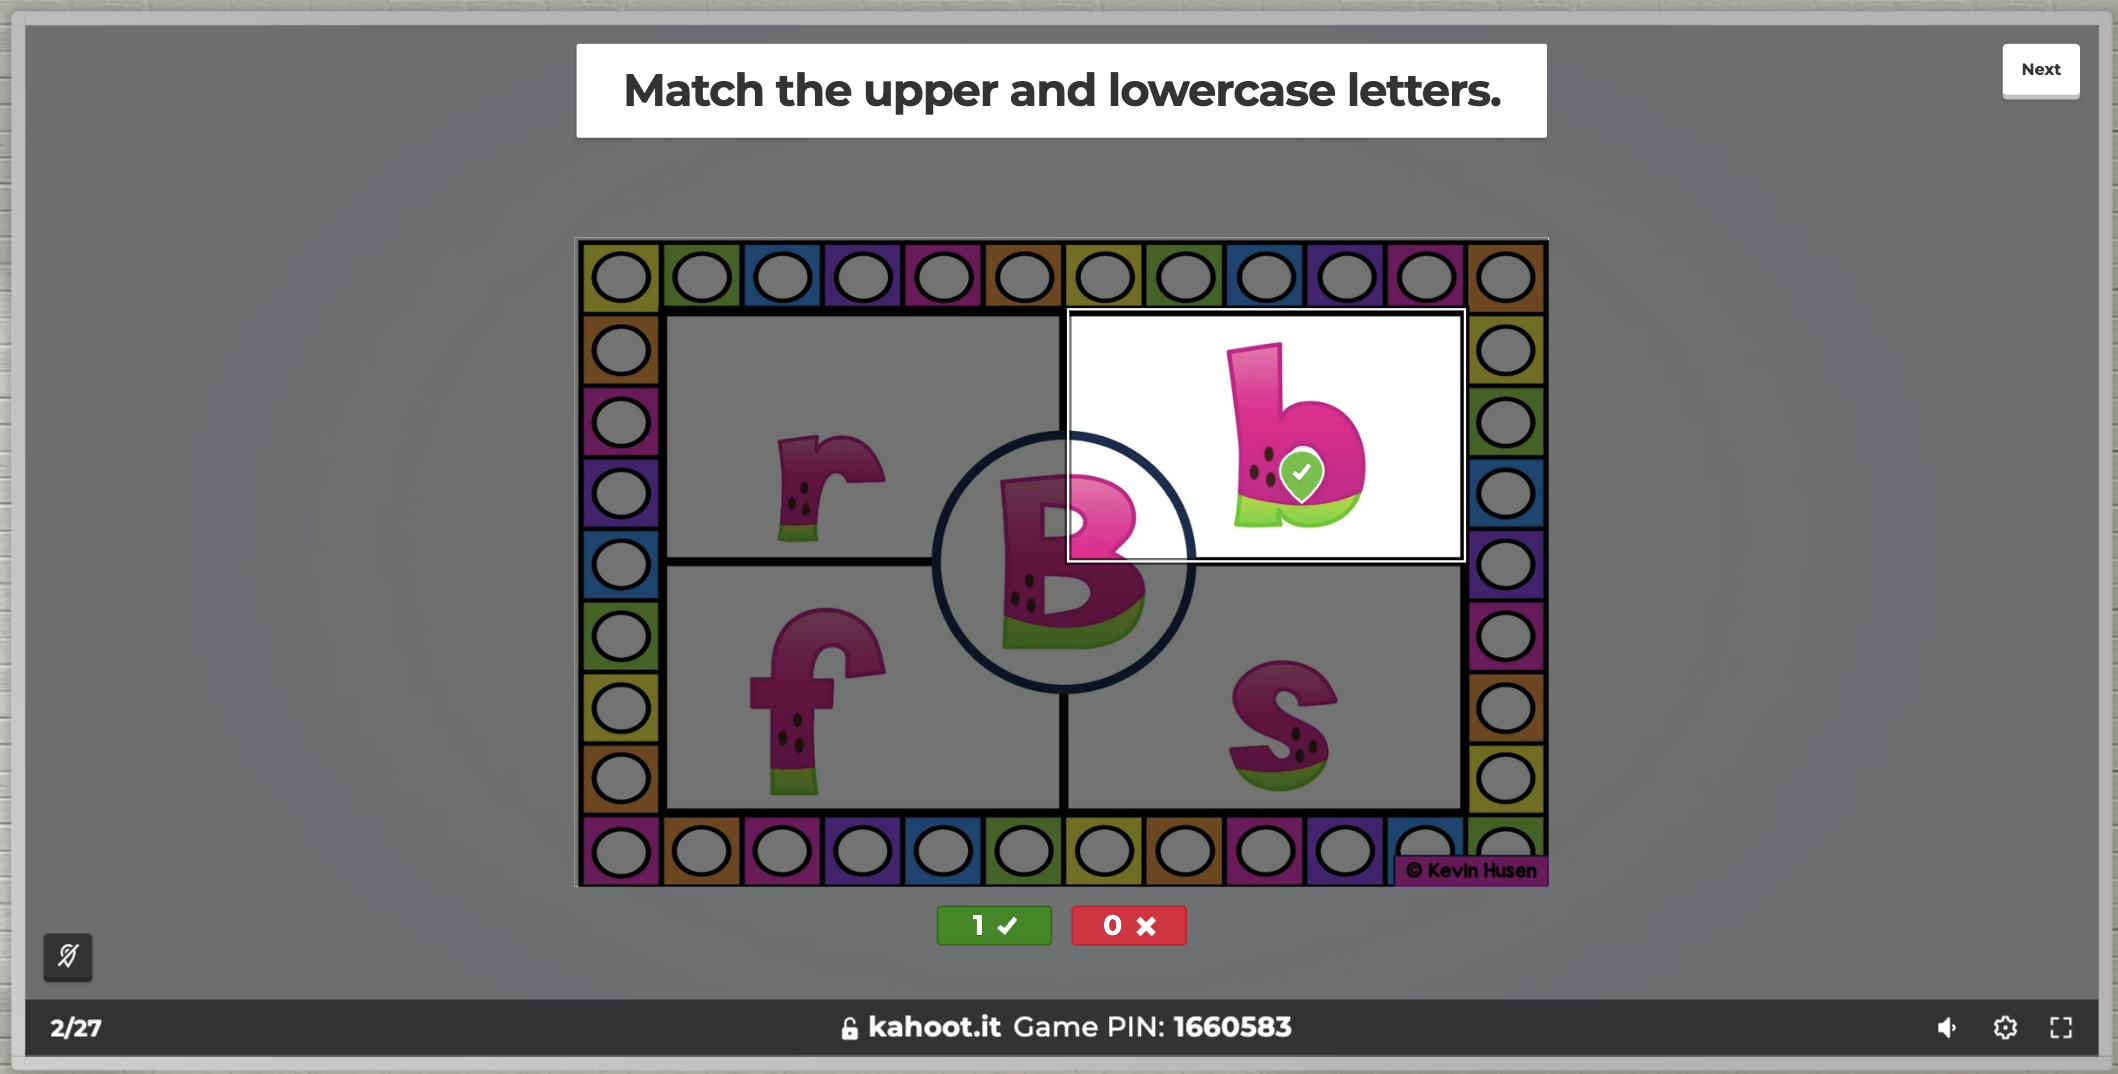 Pin answer question to match the upper and lowercase letters of B.